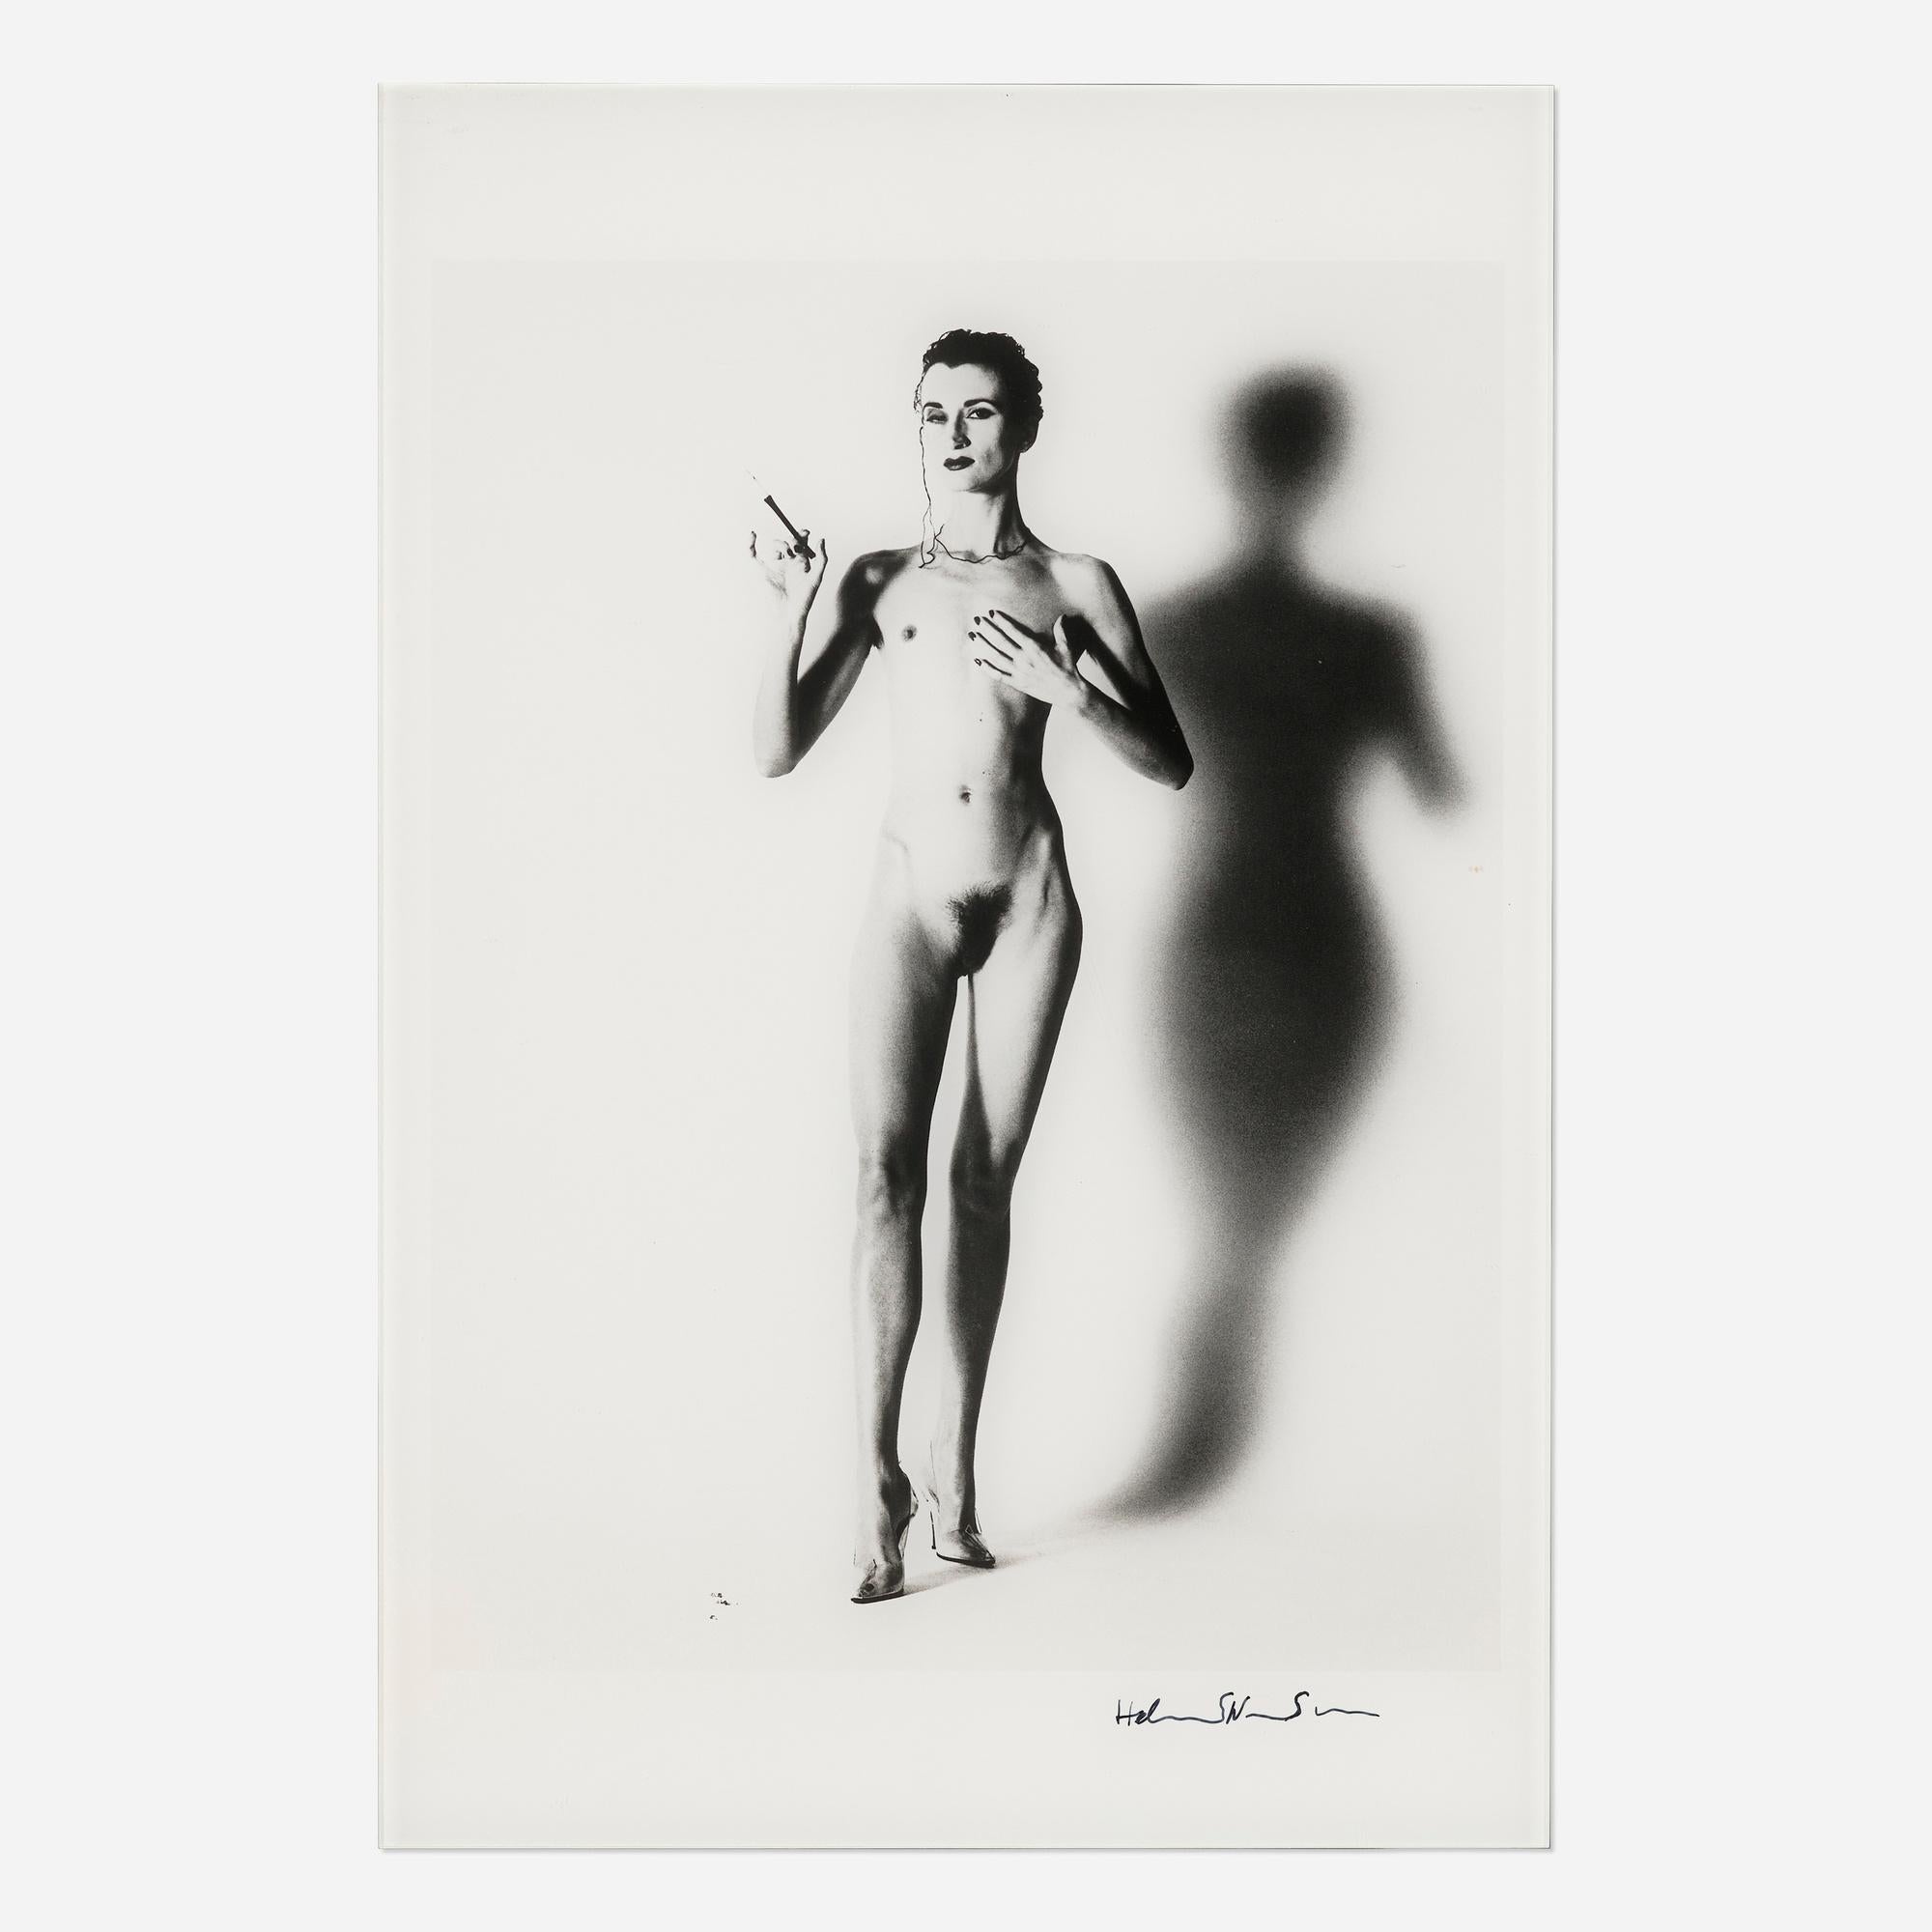 Helmut Newton Violetta with Monocle (Helmut Newton Big Nude IX, Paris, 1991):

Medium: silver gelatin print mounted between museum acrylic. Year: 1991/printed circa mid 1990s.

Dimensions: 17½ h × 11¾ w in (44 × 30 cm).
Condition: Very good overall